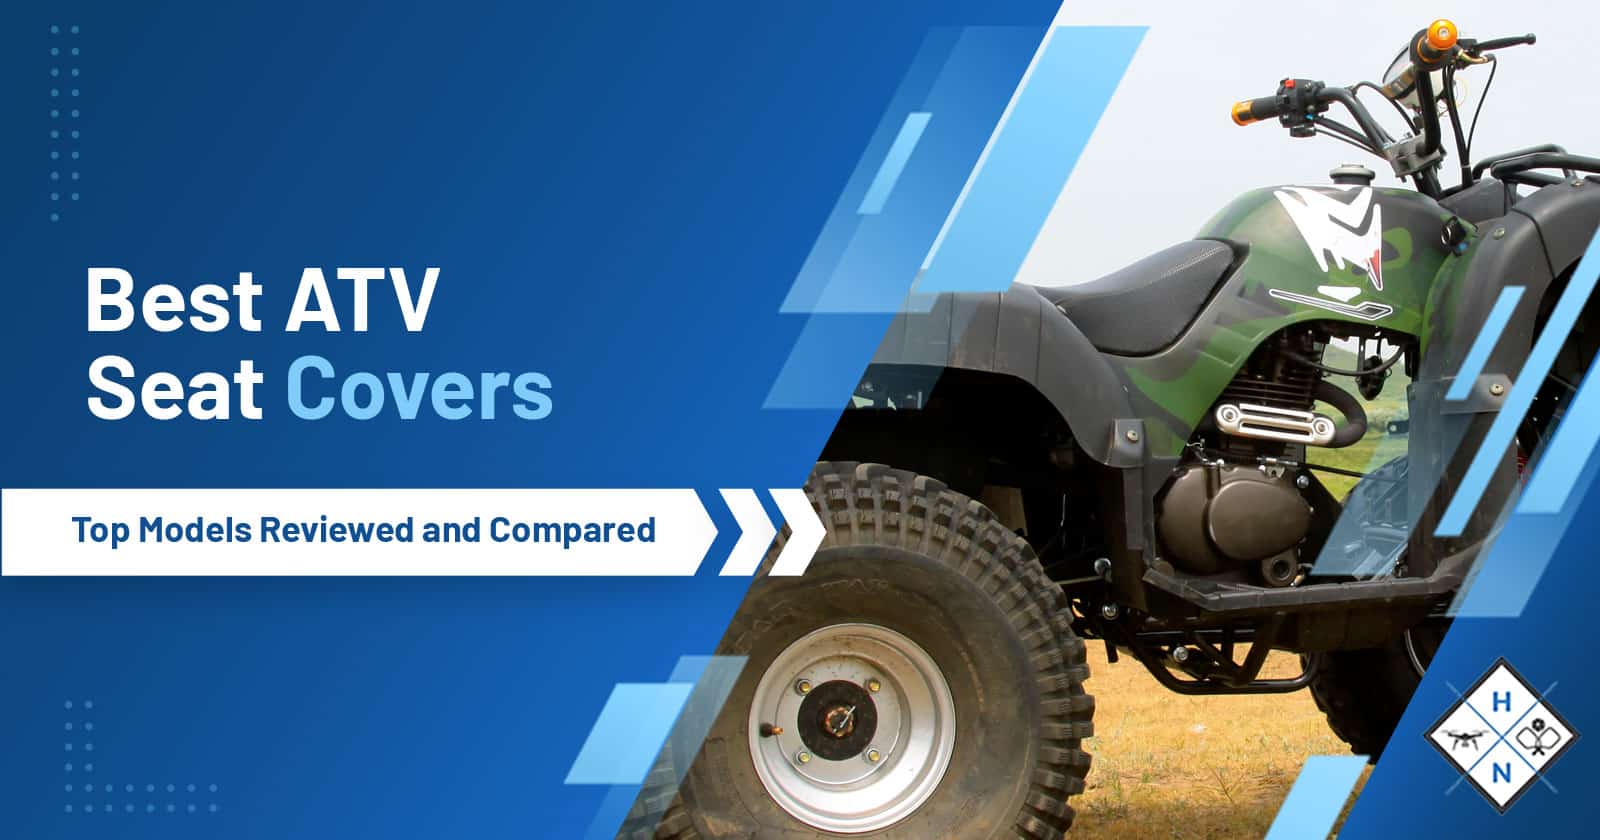 Best ATV Seat Covers &#8211; Top Models Reviewed and Compared